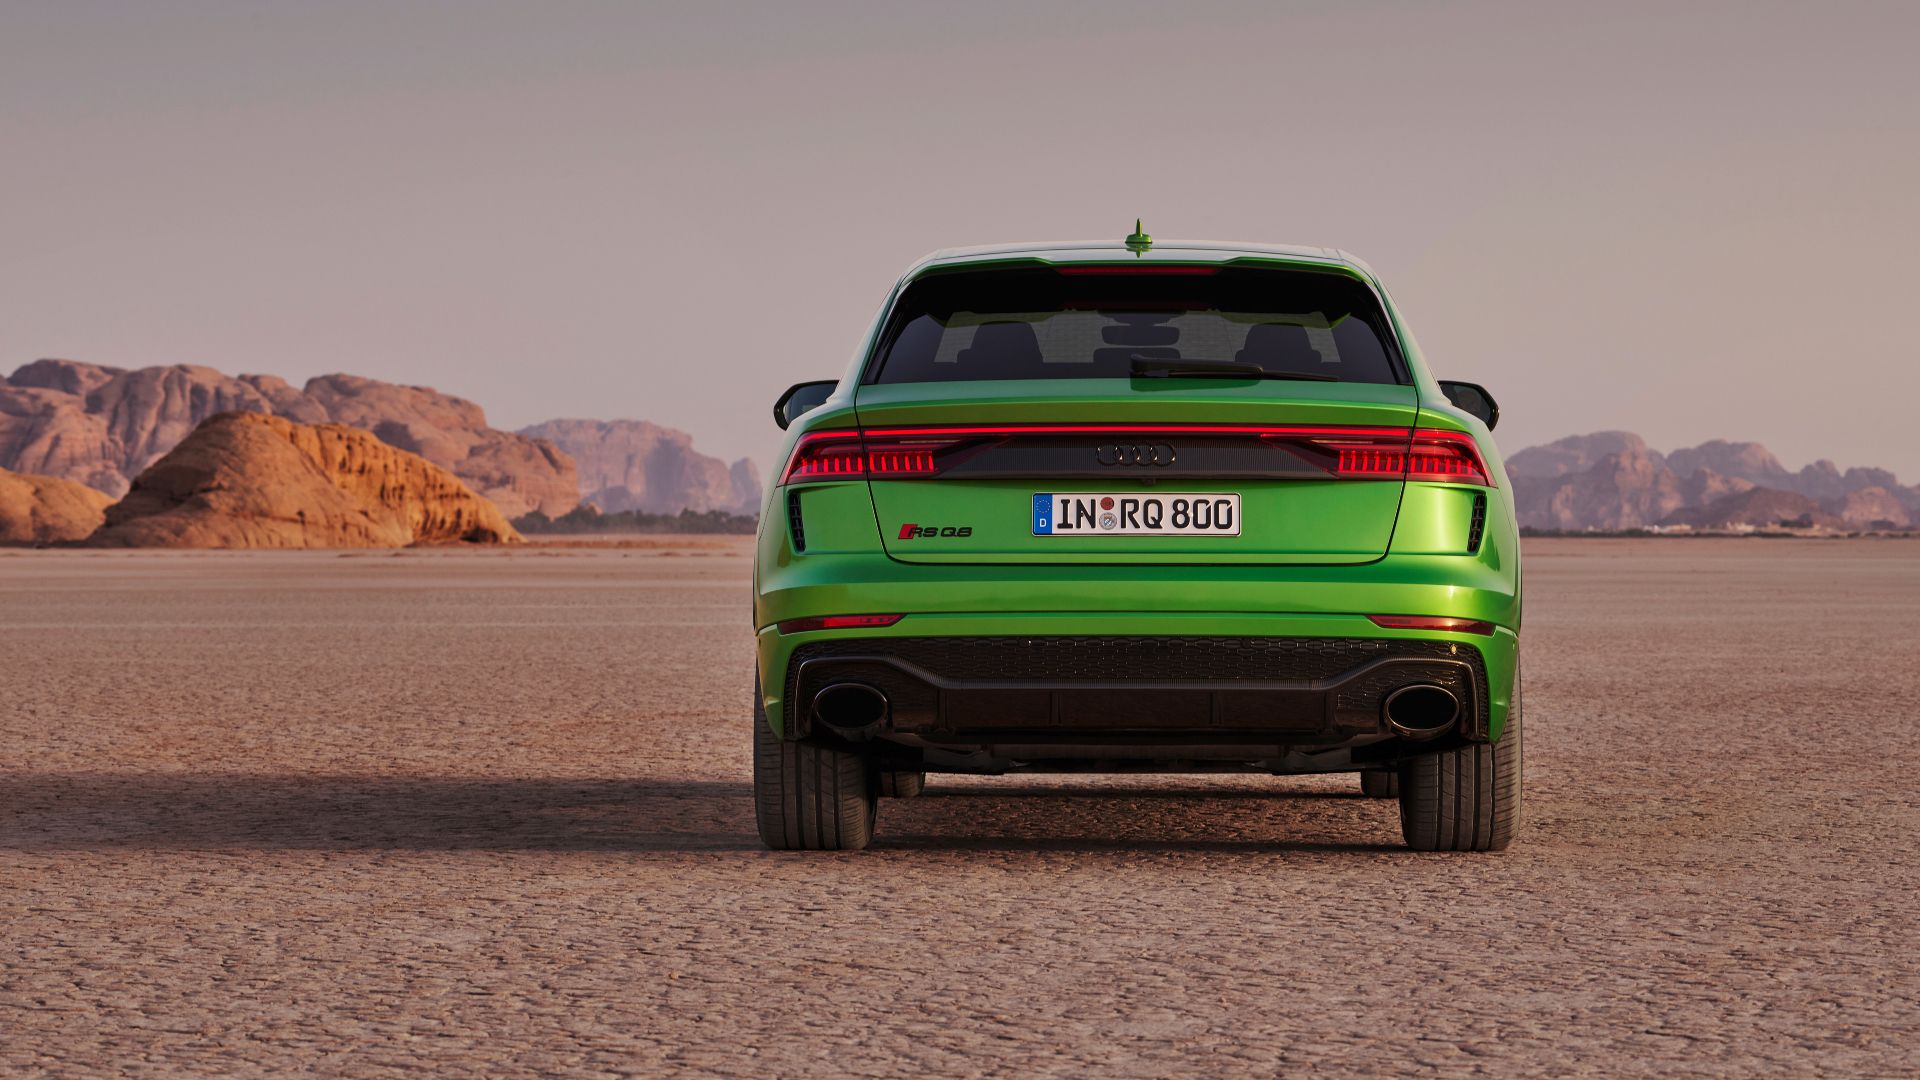 Audi RS Q8 in the rear